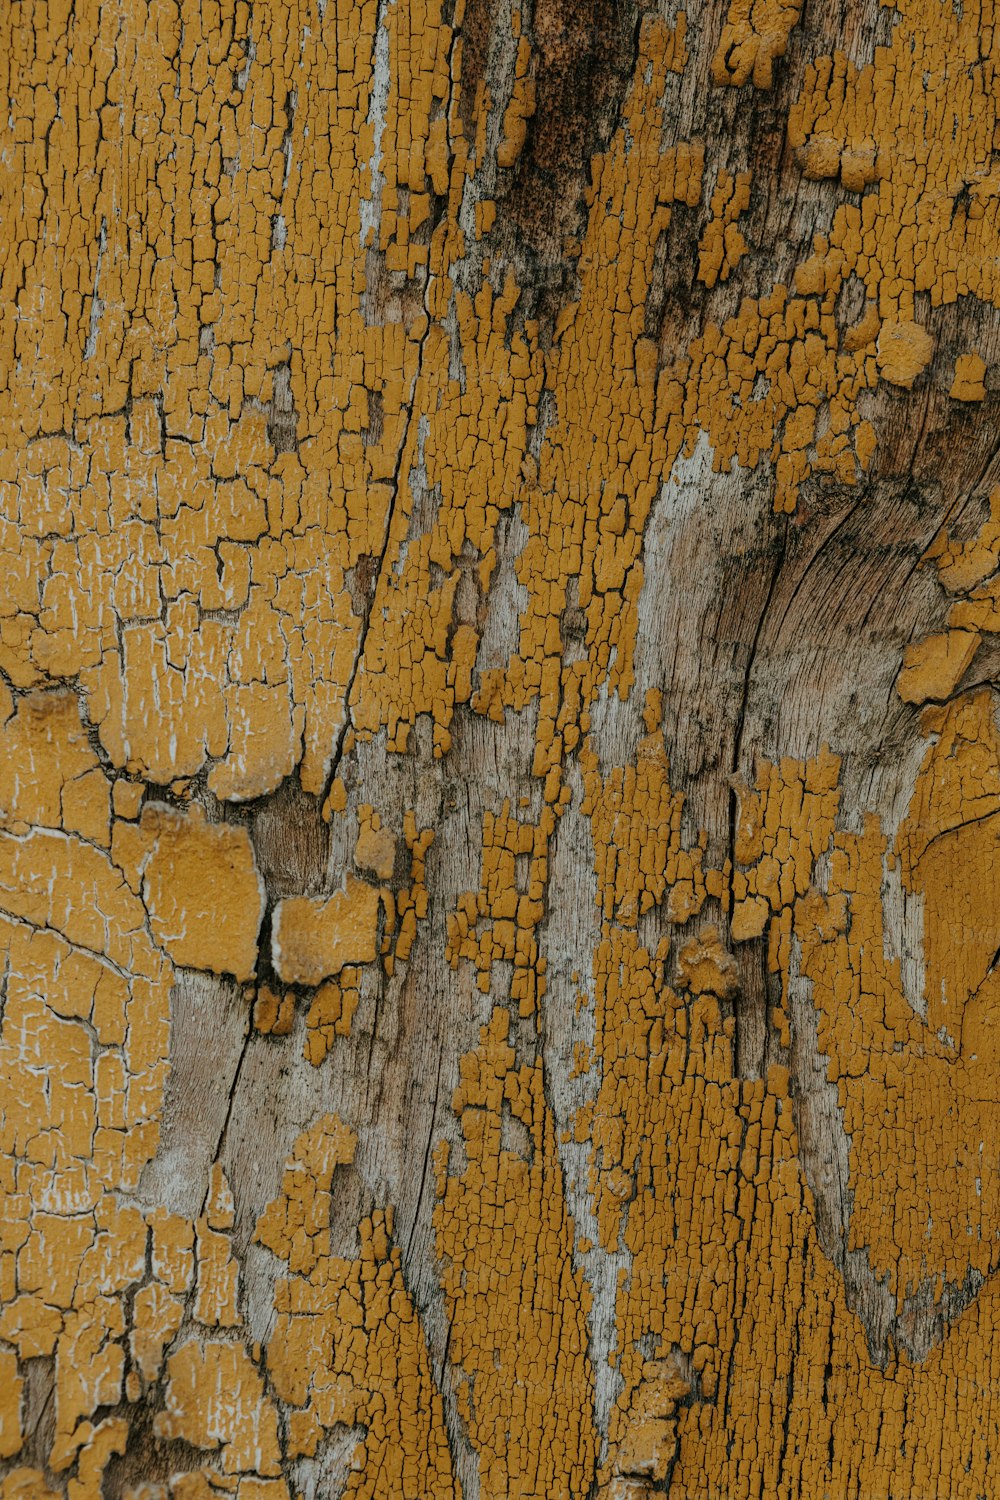 a close up of a tree with yellow paint